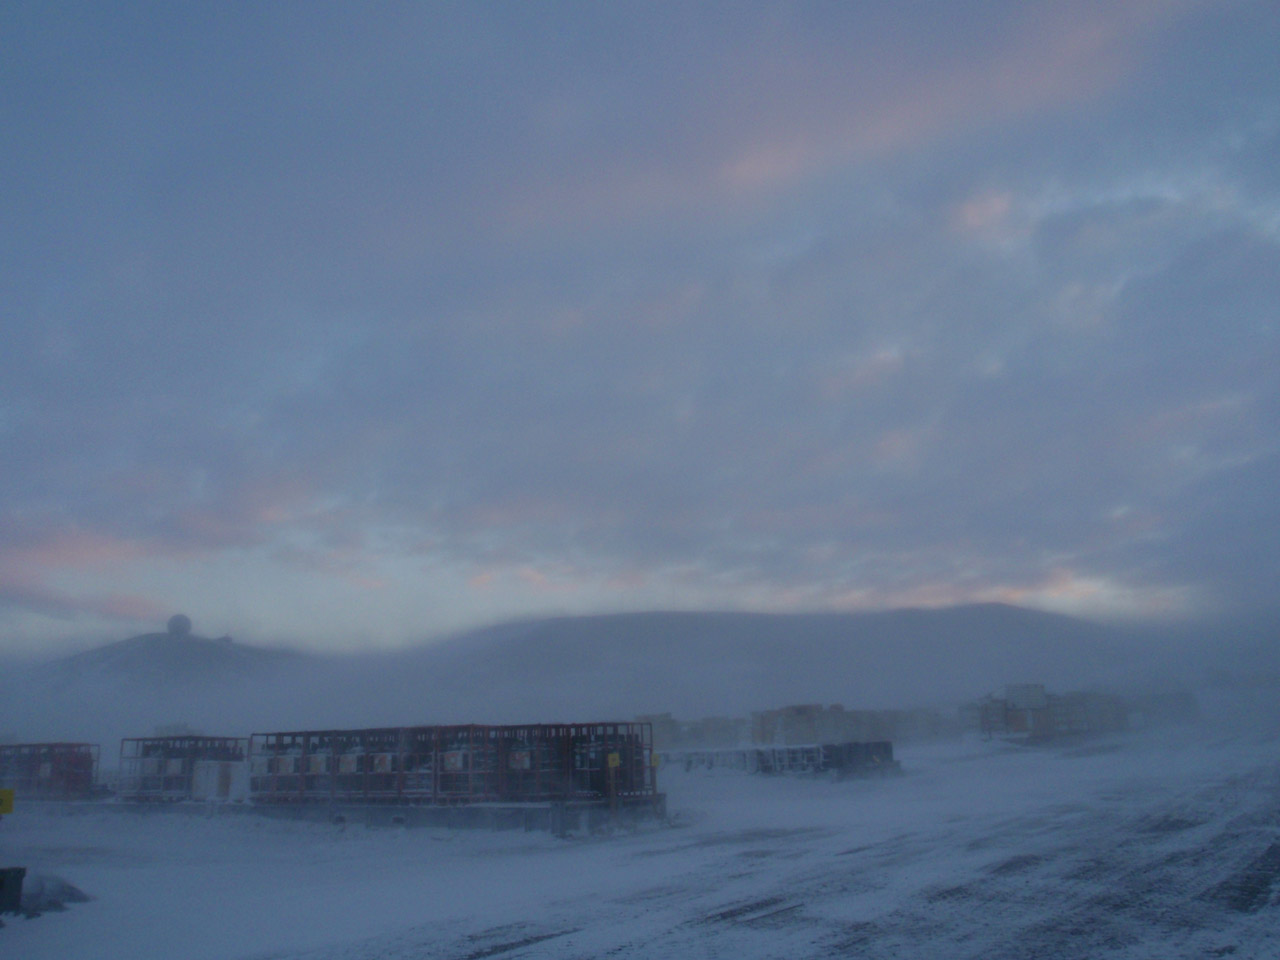 Blowing Snow at "The Ballpark" (storage area) at McMurdo Station, Antarctica.  Although a photograph, the snow gives it an impressionist feel.